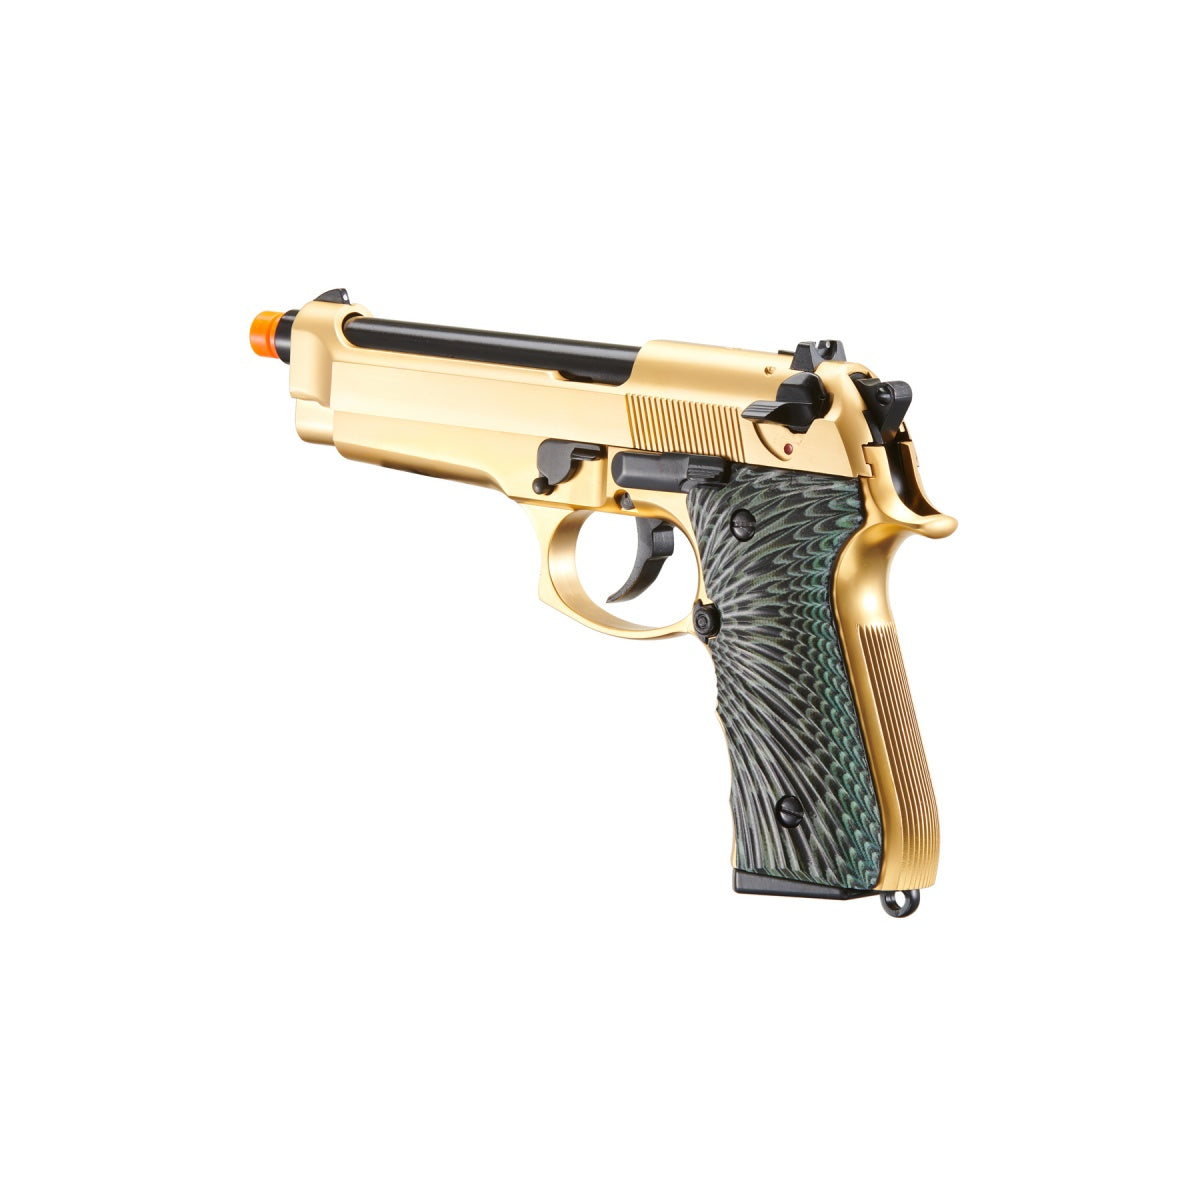 WE-Tech New System M92 Eagle Full Auto Airsoft Gas Blowback Pistol (Color: Gold) - ssairsoft